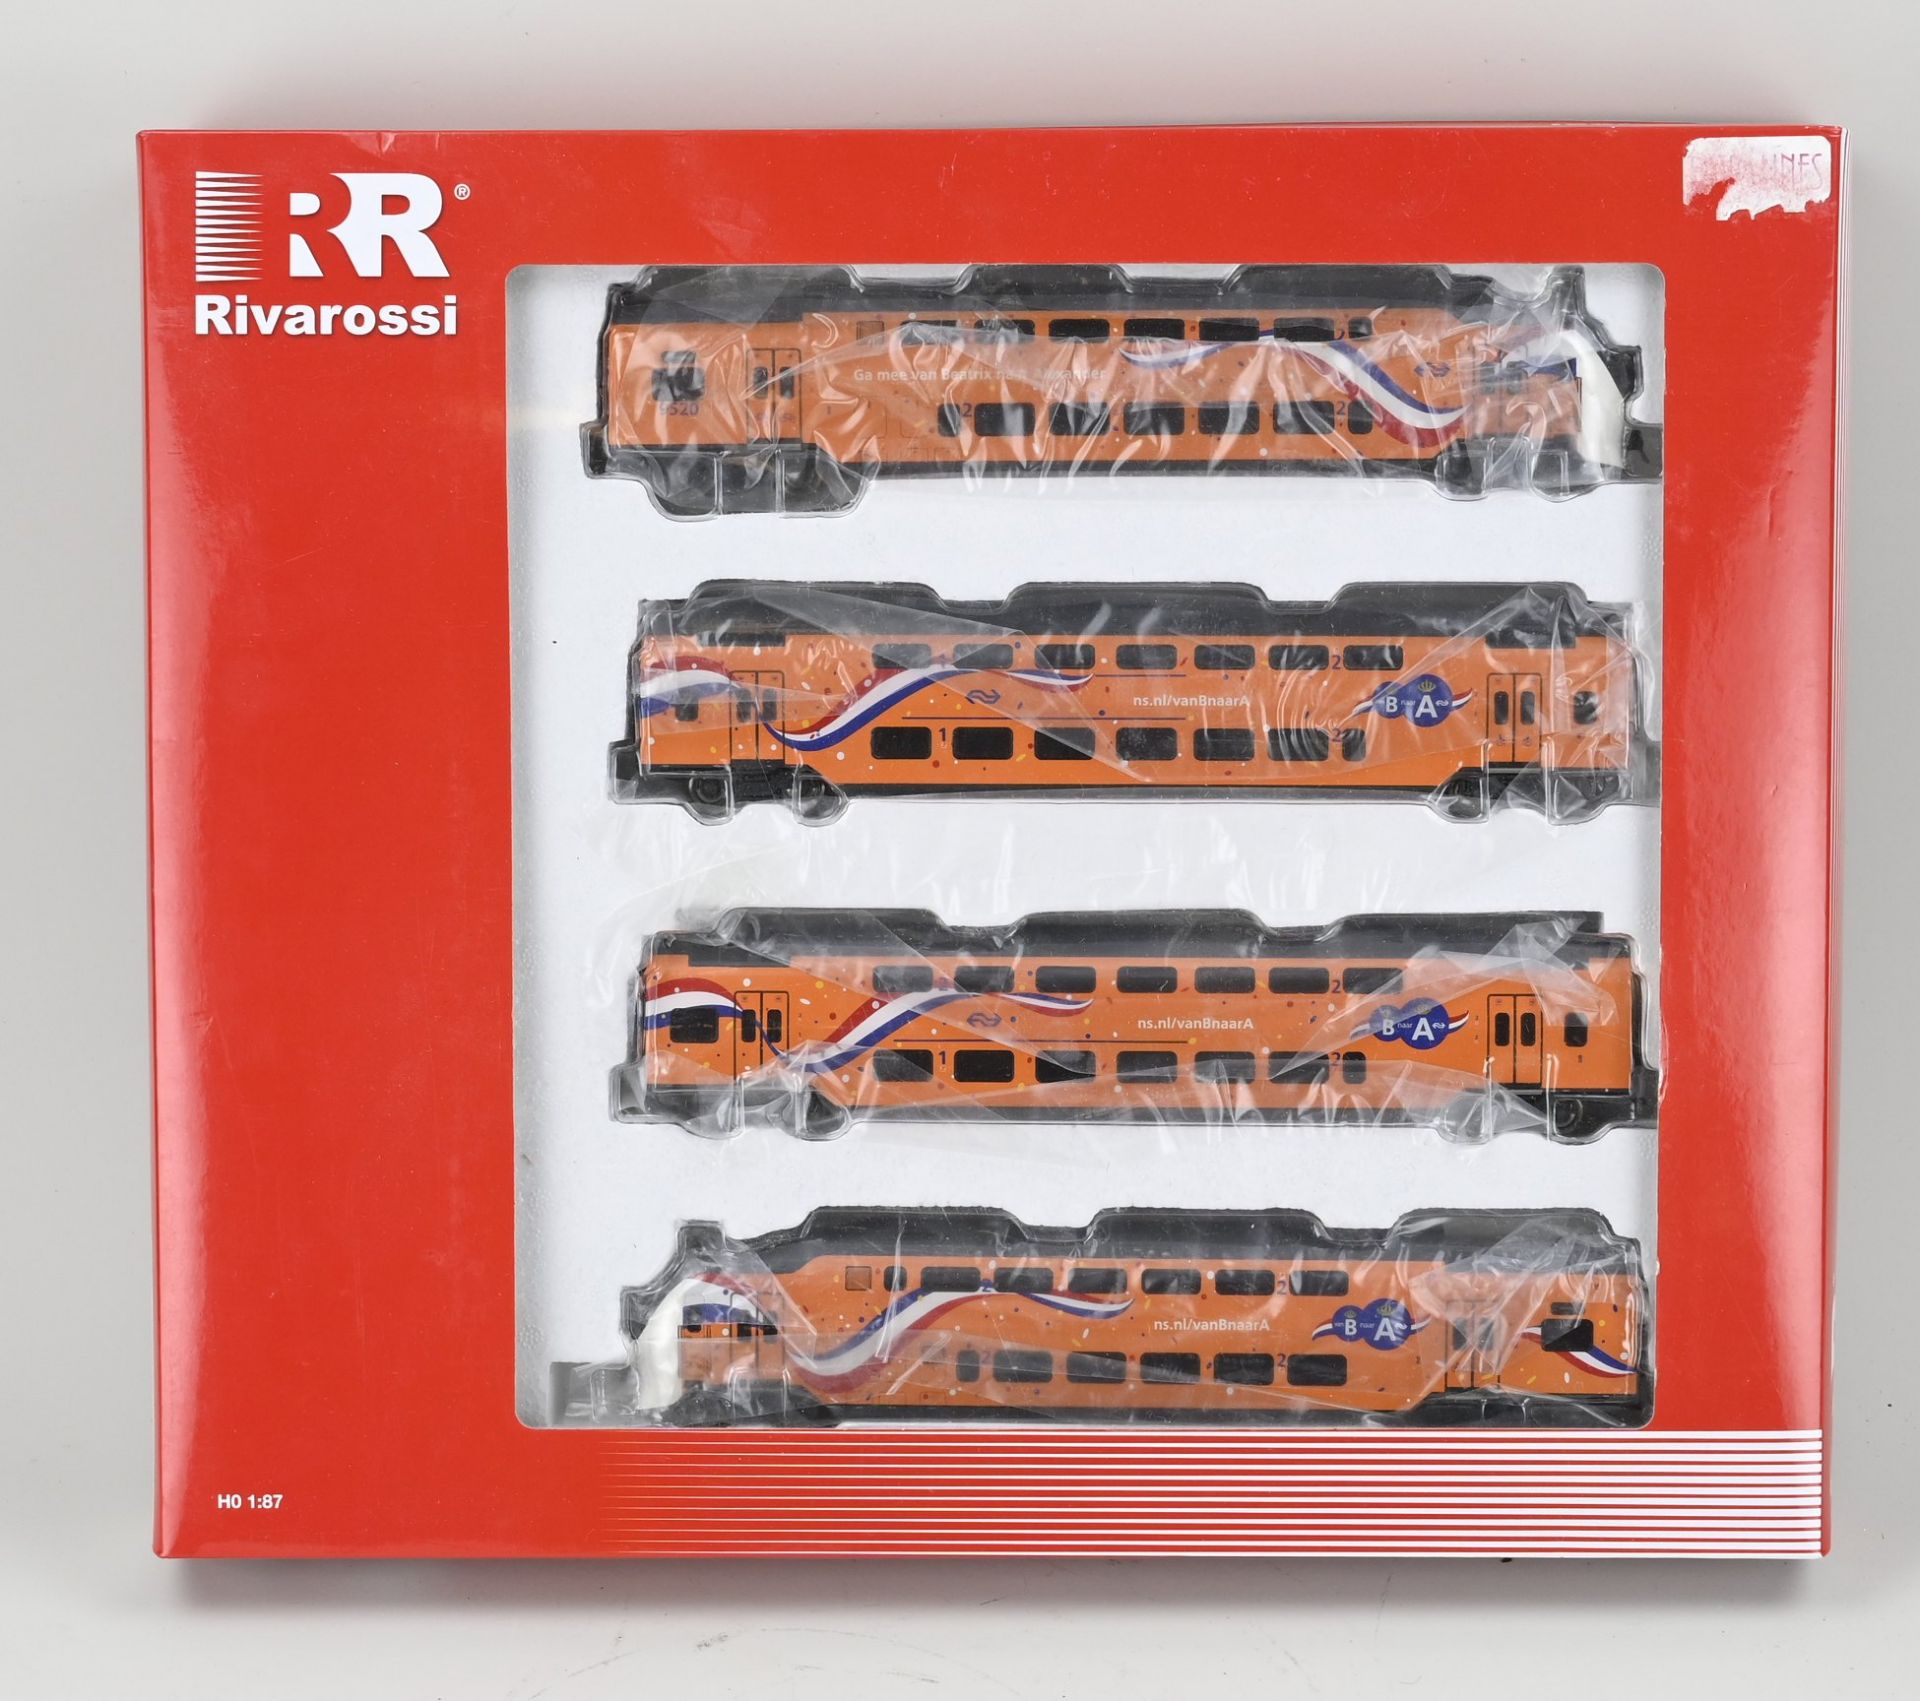 Special edition Hornby train set